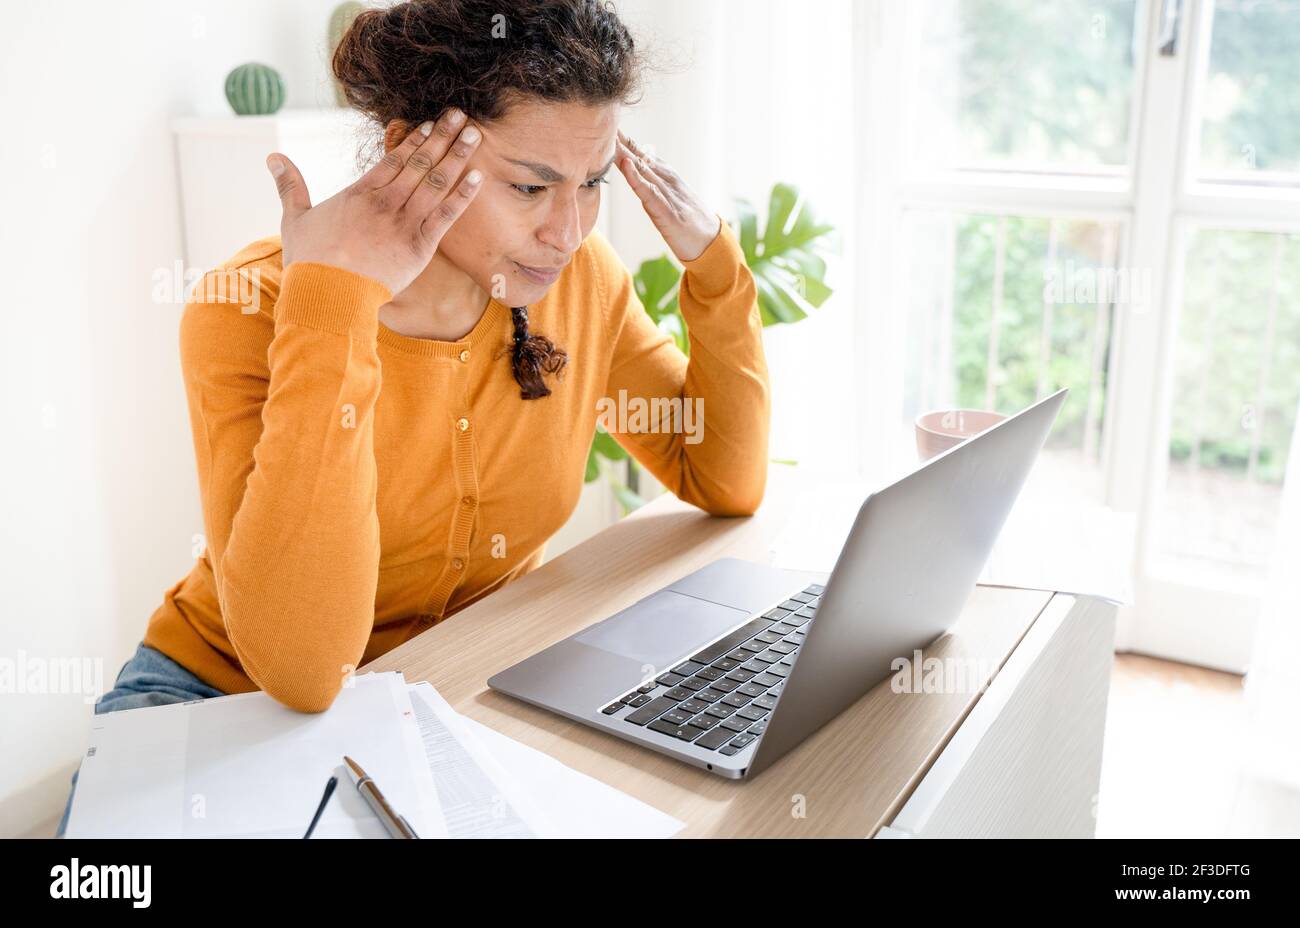 Woman feeling tired and overworked working from home Stock Photo